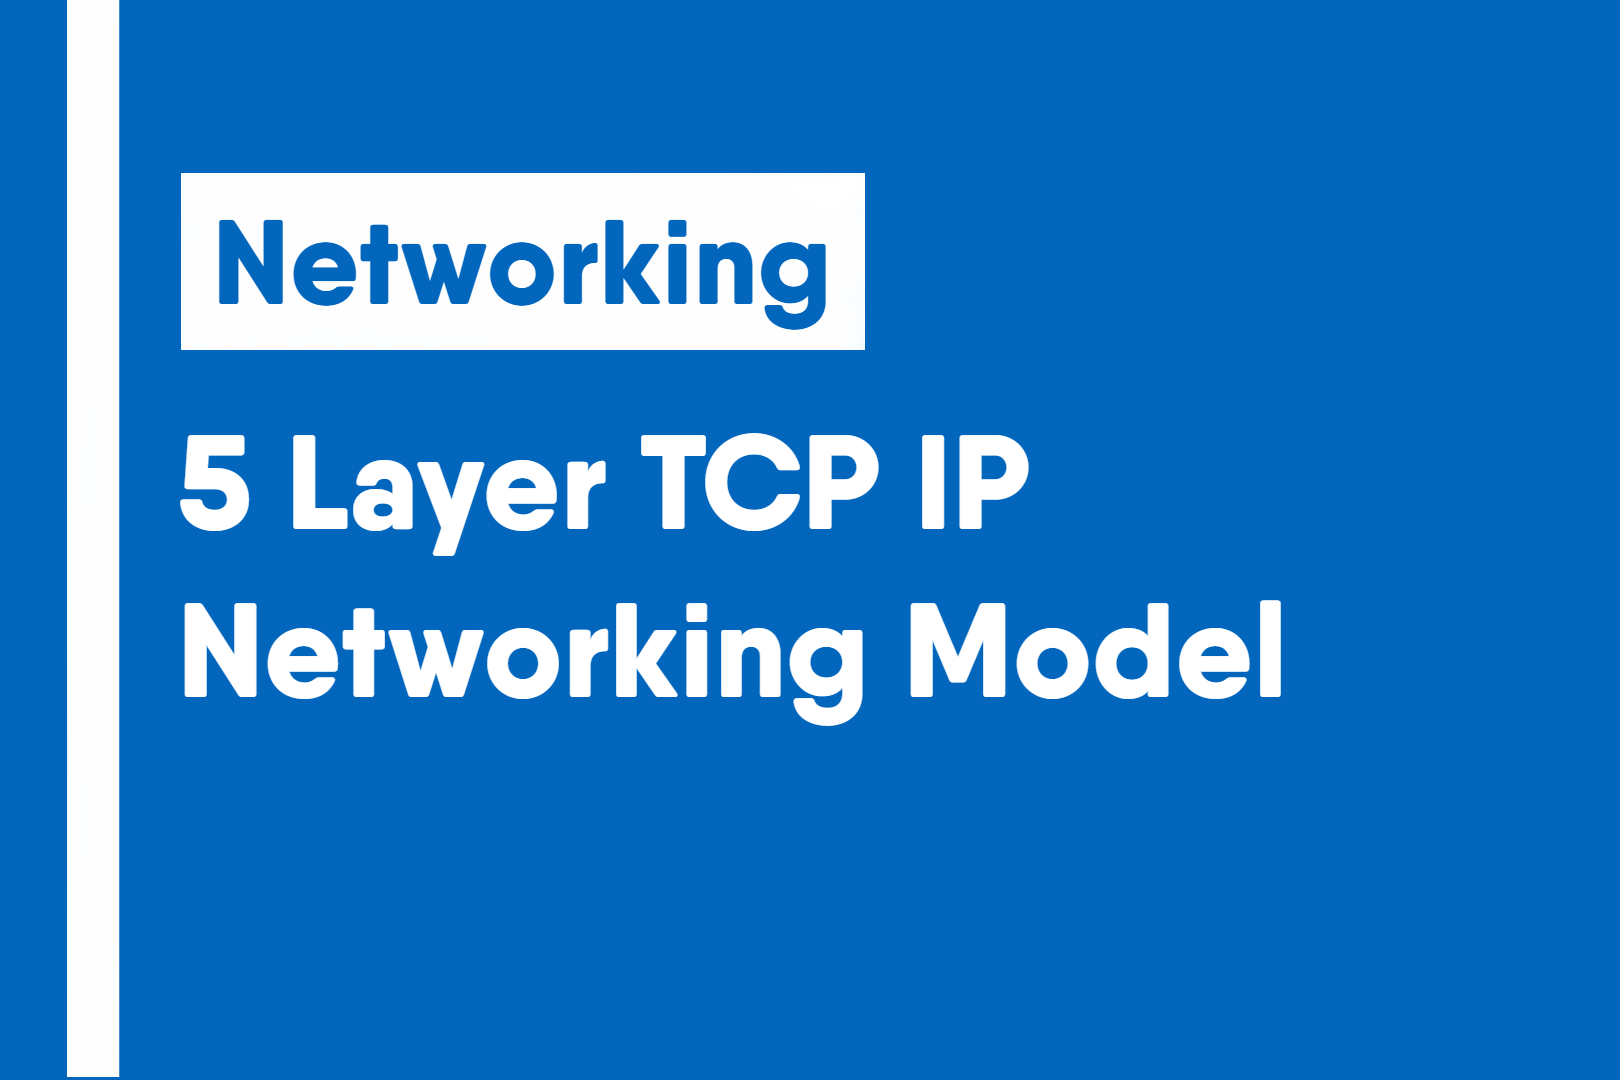 5 Layer TCP IP Networking Model